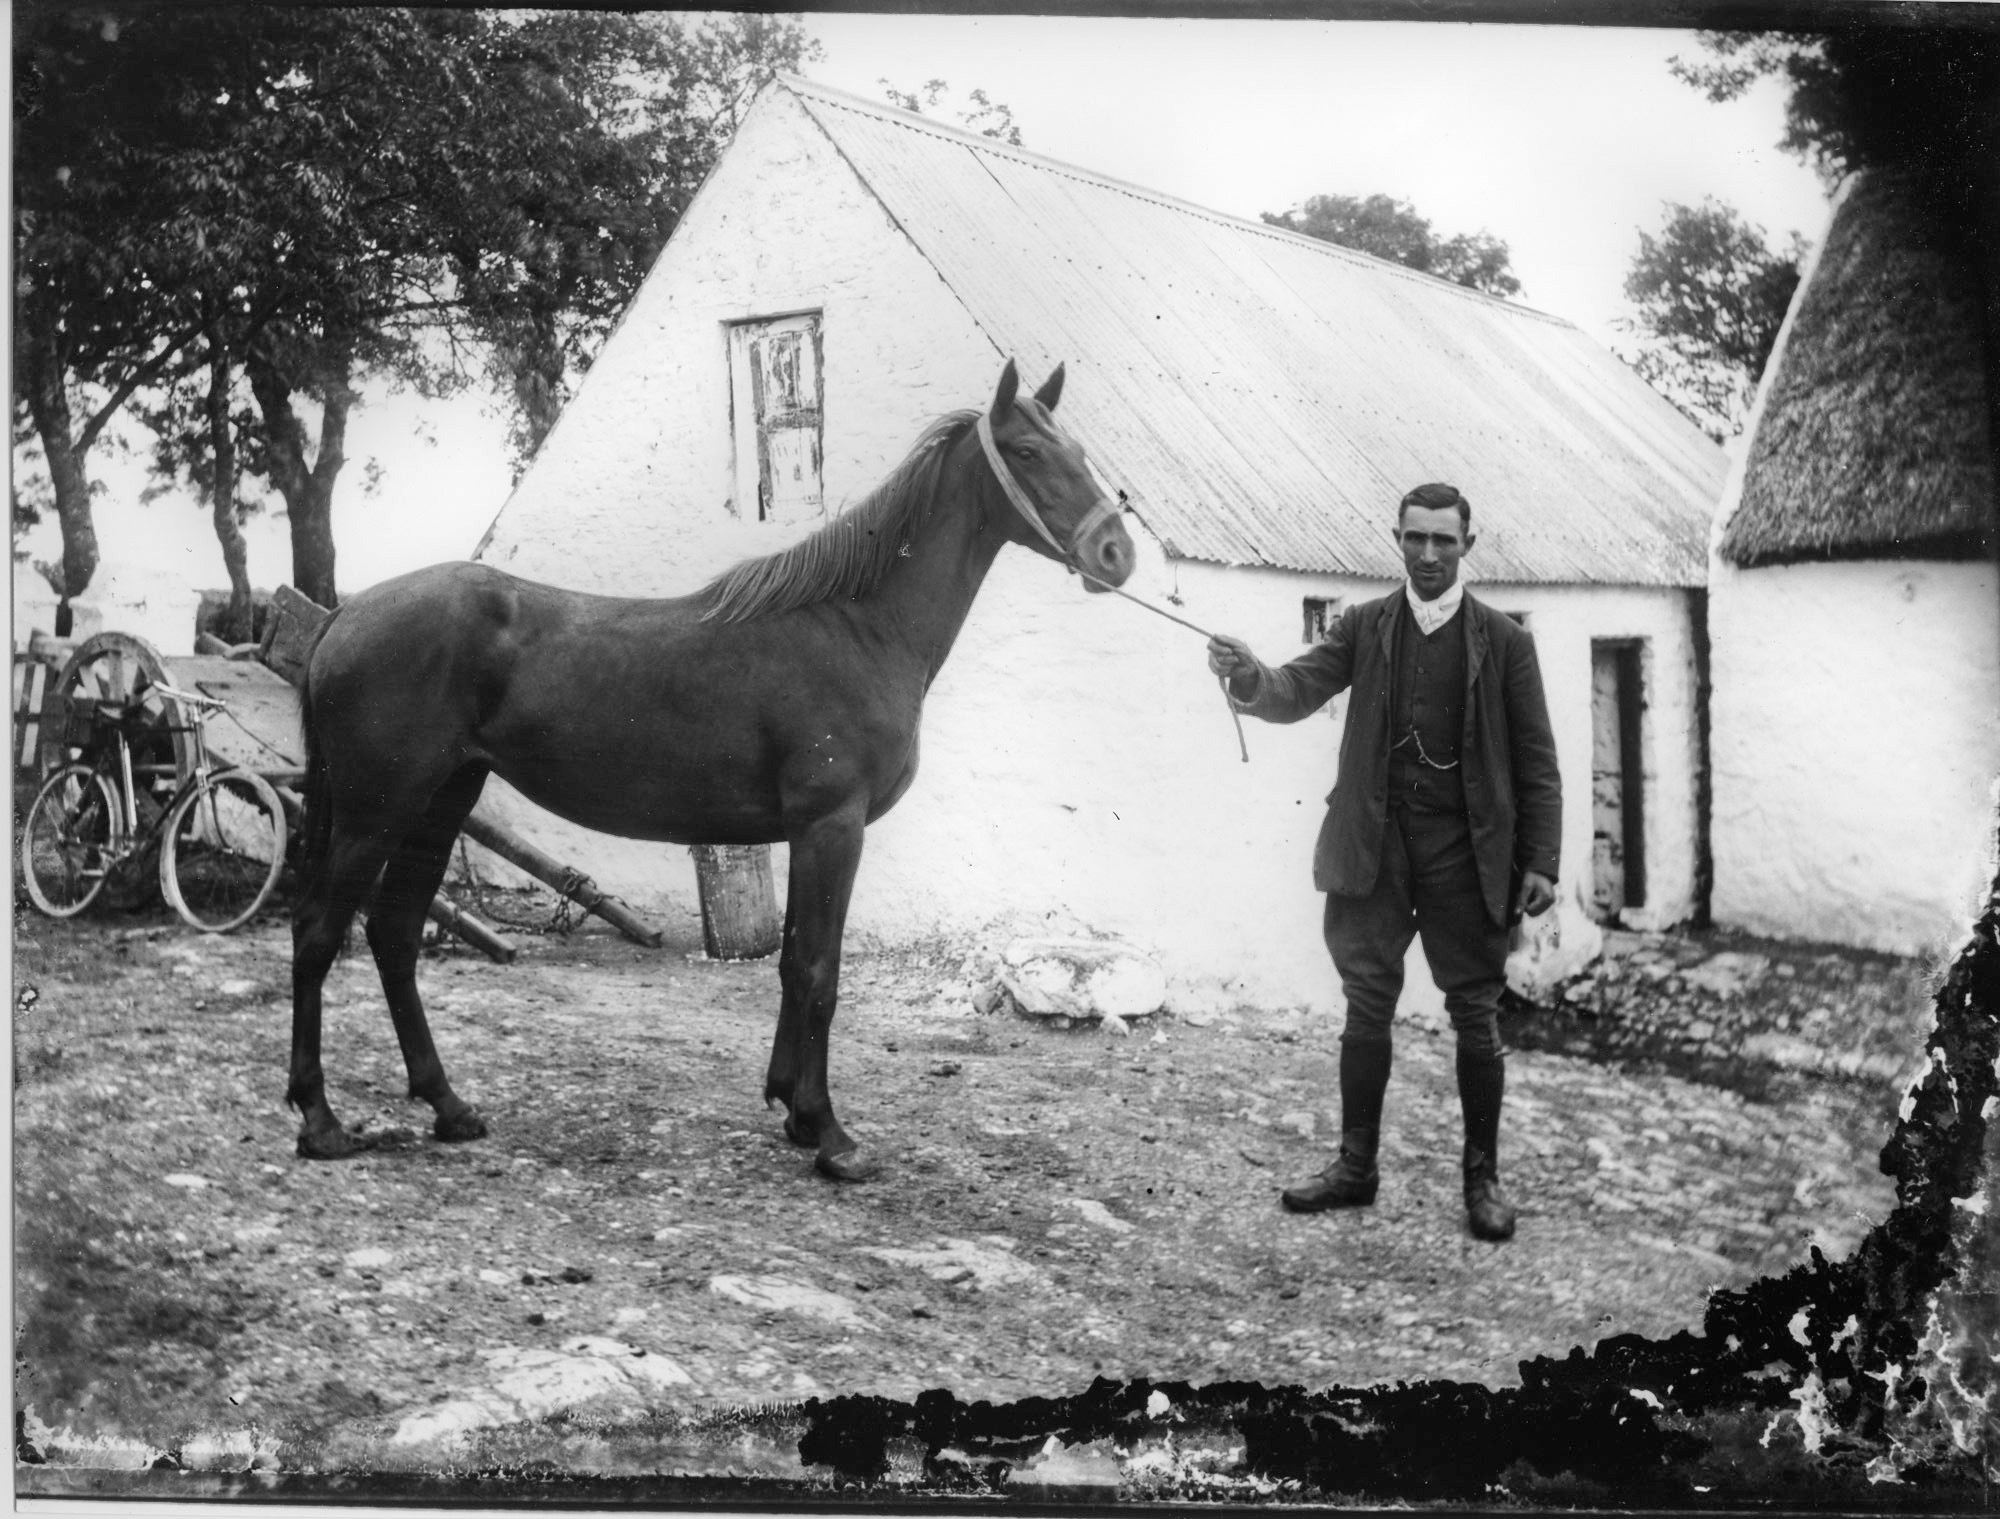 Taken sometime during the late 1800s with a glass plate camera. It is somewhere in County Leitrim, Ireland. View full size.